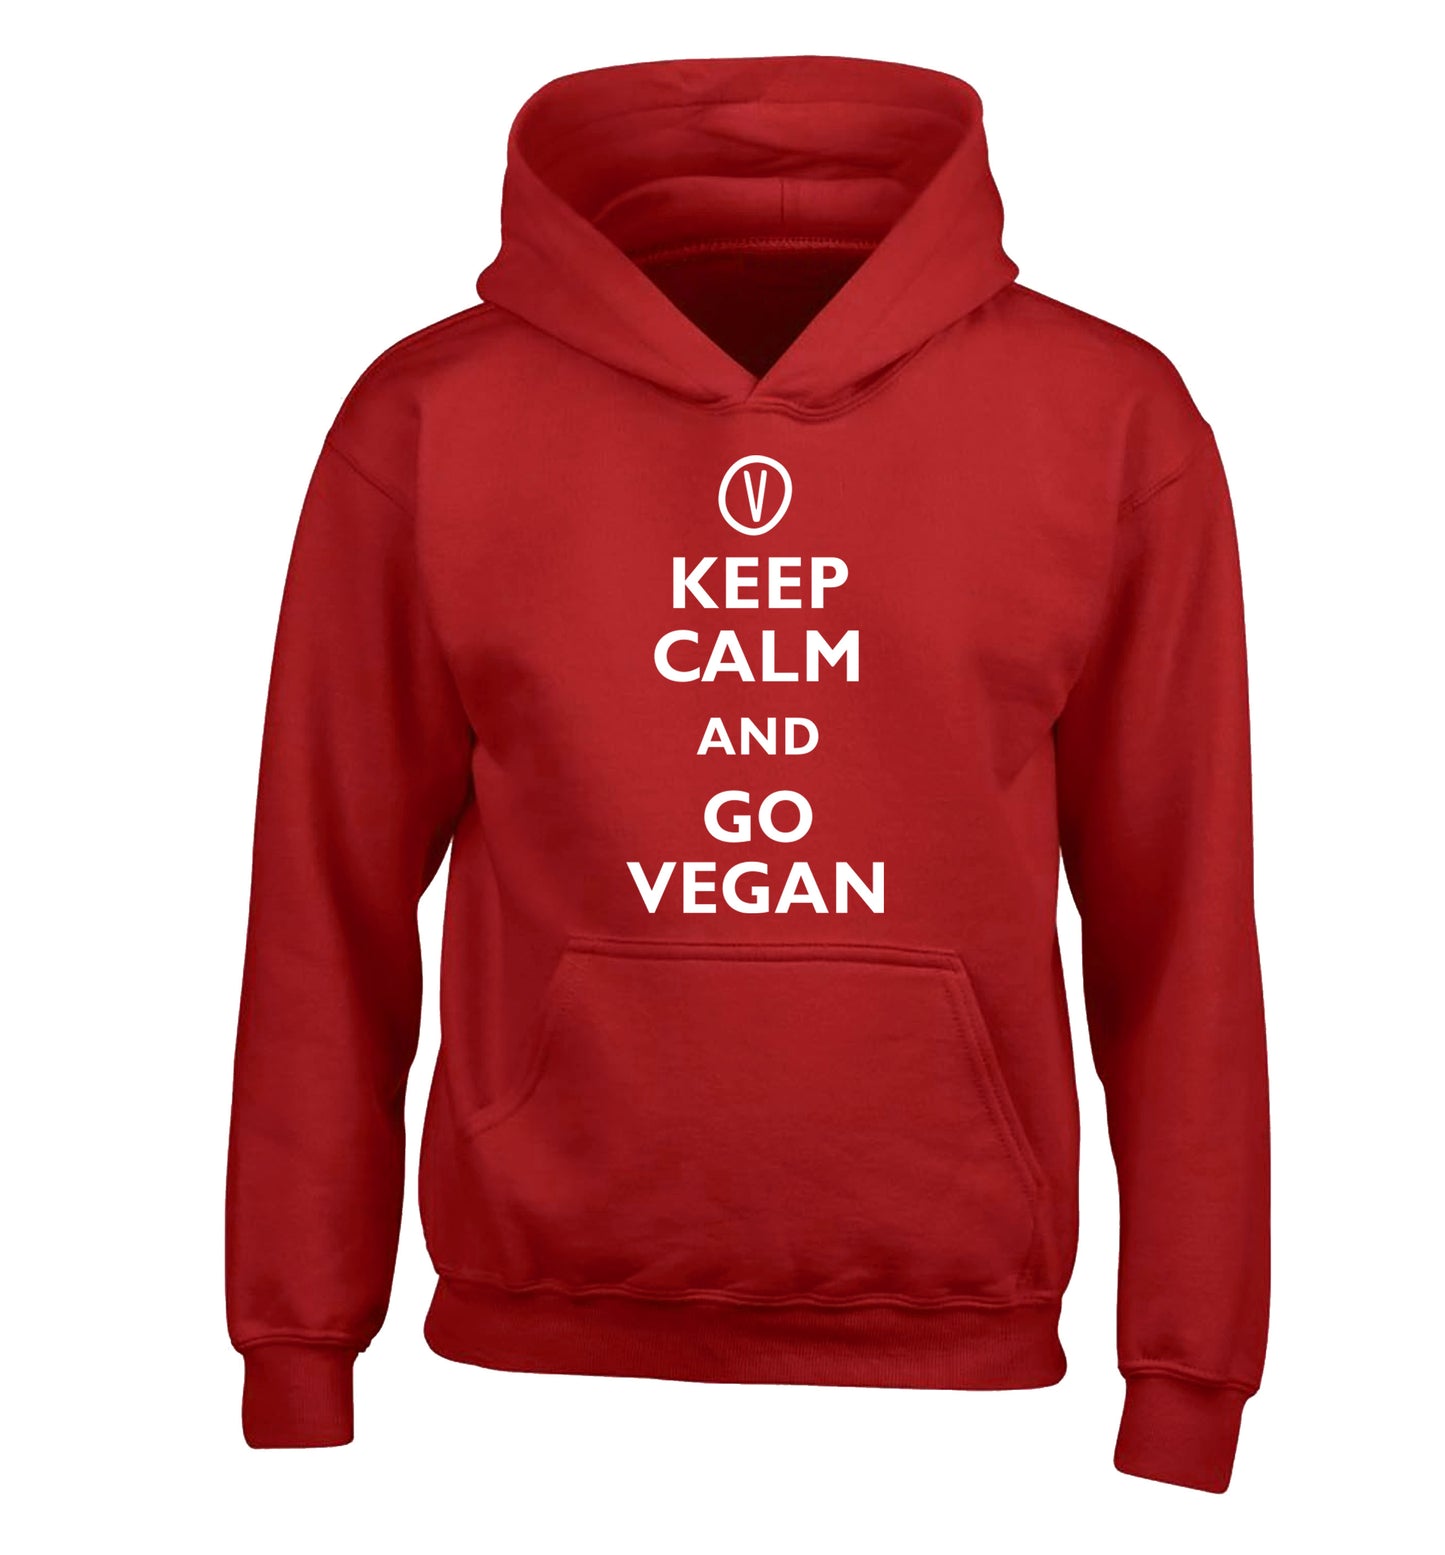 Keep calm and go vegan children's red hoodie 12-13 Years